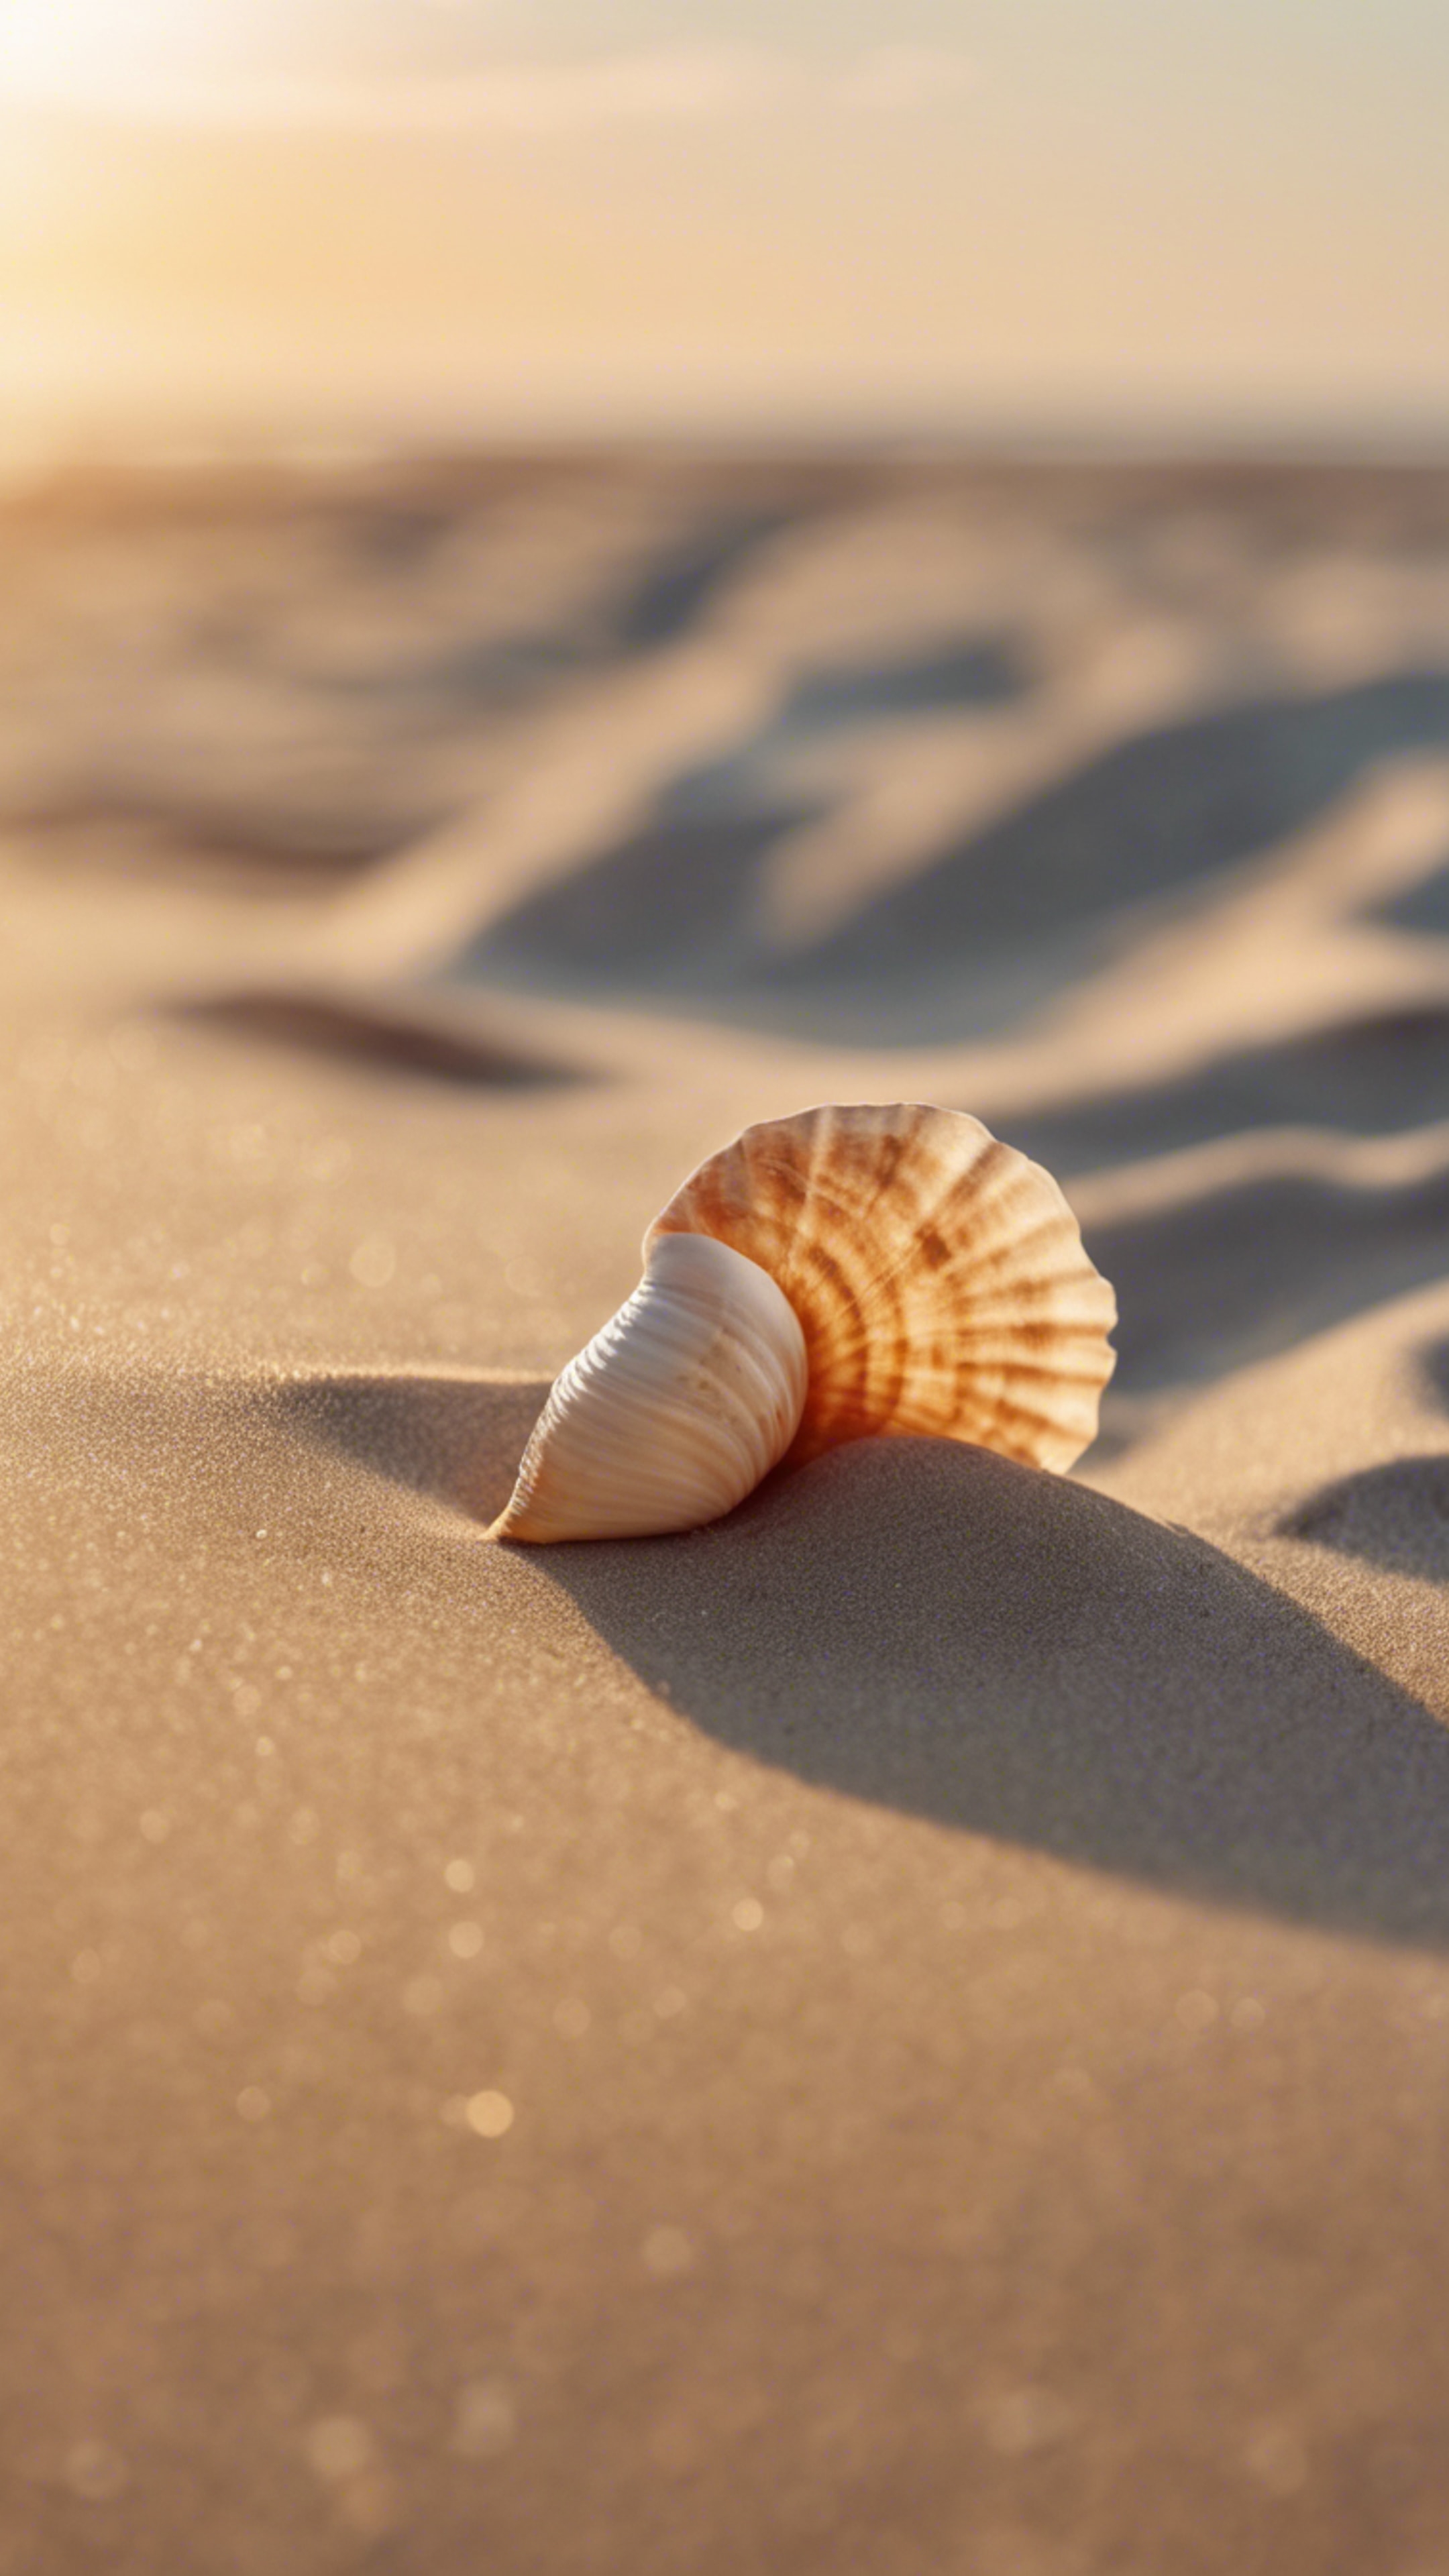 A sandy beach at sunrise, with a lonely seashell on the smooth, cool beige sand. Wallpaper[f397365f3b8642f18a02]